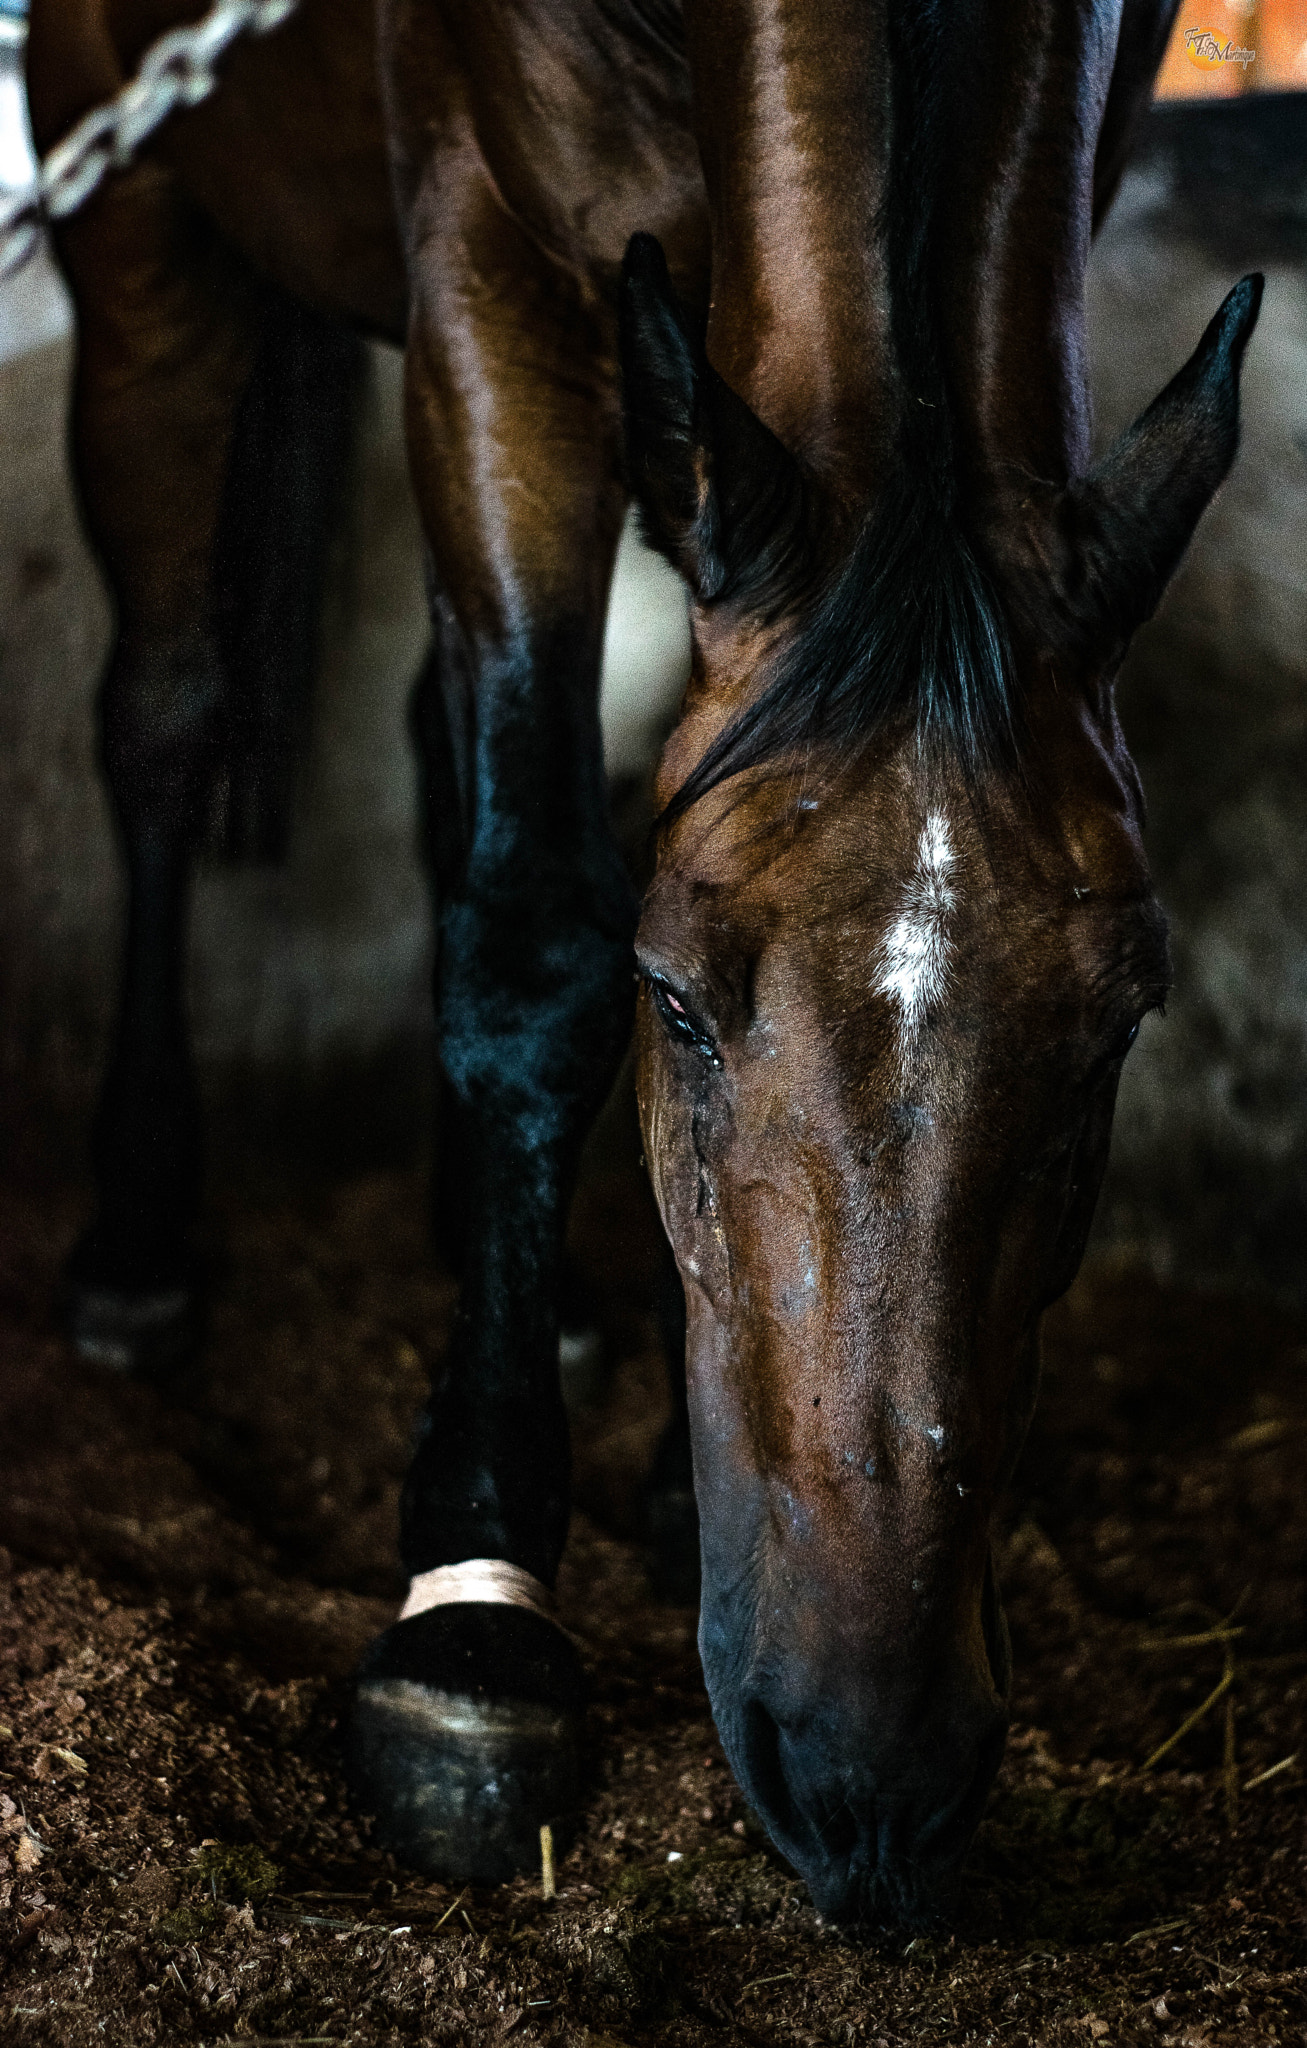 Nikon D5300 + AF-S DX VR Zoom-Nikkor 18-55mm f/3.5-5.6G + 2.8x sample photo. Chevaux photography